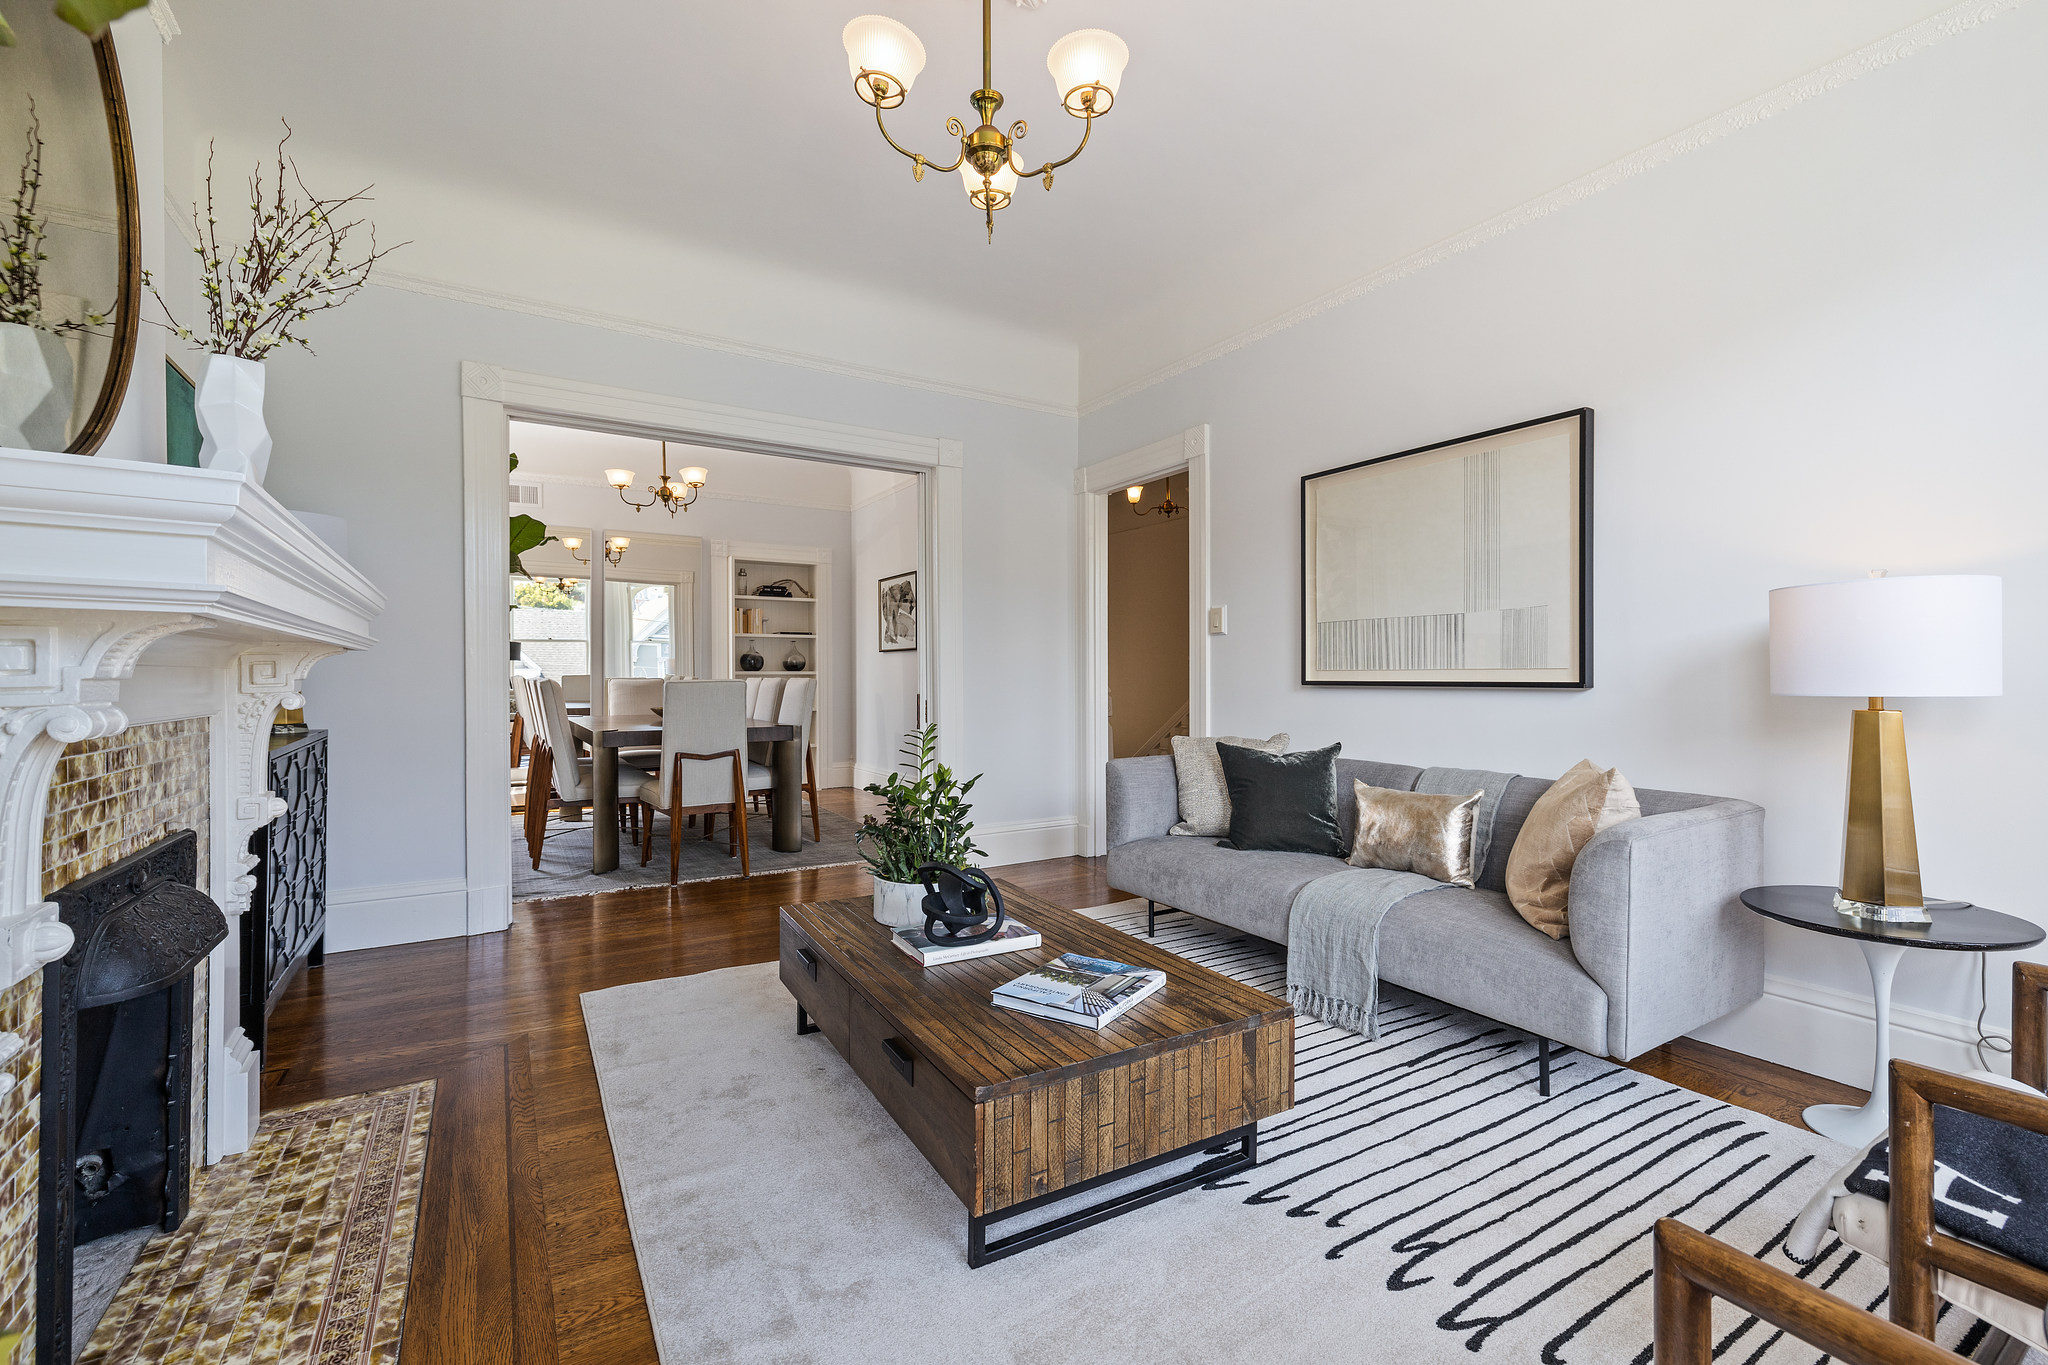 Property Photo: Living room at 454 Frederick Street, featuring wood floors and a fireplace